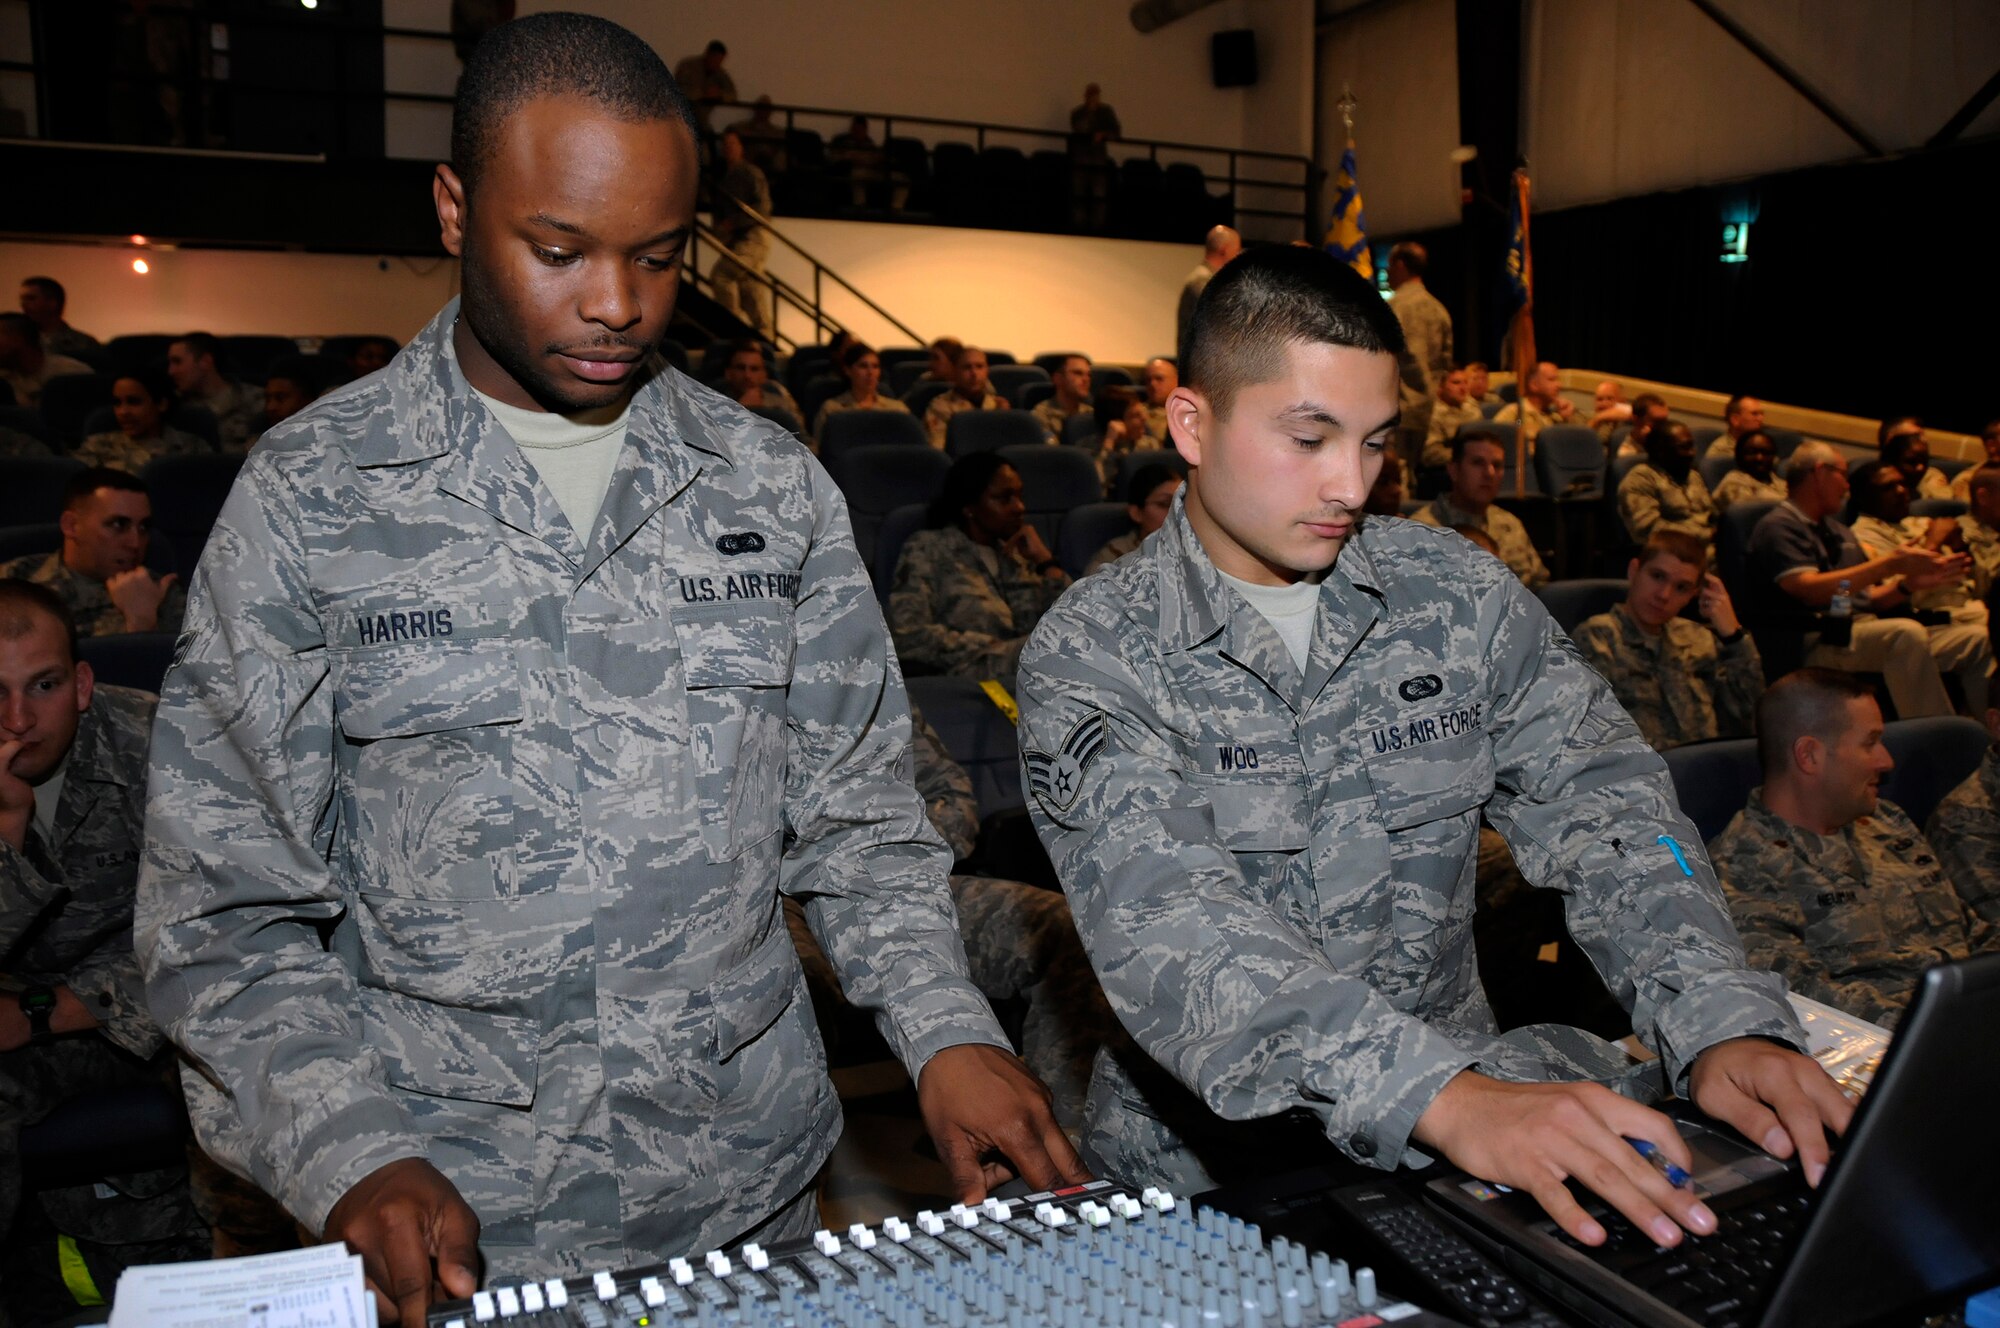 Airman 1st Class Quincy Harris and Senior Airman Bruce Woo, both assigned to the 379th Expeditionary Communications Squadron, provide audiovisual support for the base's monthly promotion and recognition ceremony Sept. 30, 2008.  Airman Harris works the sound board, while Airman Woo is in charge of the slide show and visuals.  Airman Harris, a native of Columbus, Mo., is deployed from Keesler Air Force Base, Miss.  Airman Woo, hailing from Canton, Ohio, is deployed from Kadena Air Base, Japan.  Both are deployed to this undisclosed air base in Southwest Asia in support of Operations Iraqi and Enduring Freedom and Joint Task Force-Horn of Africa.  (U.S. Air Force photo by Tech. Sgt. Michael Boquette/Released)